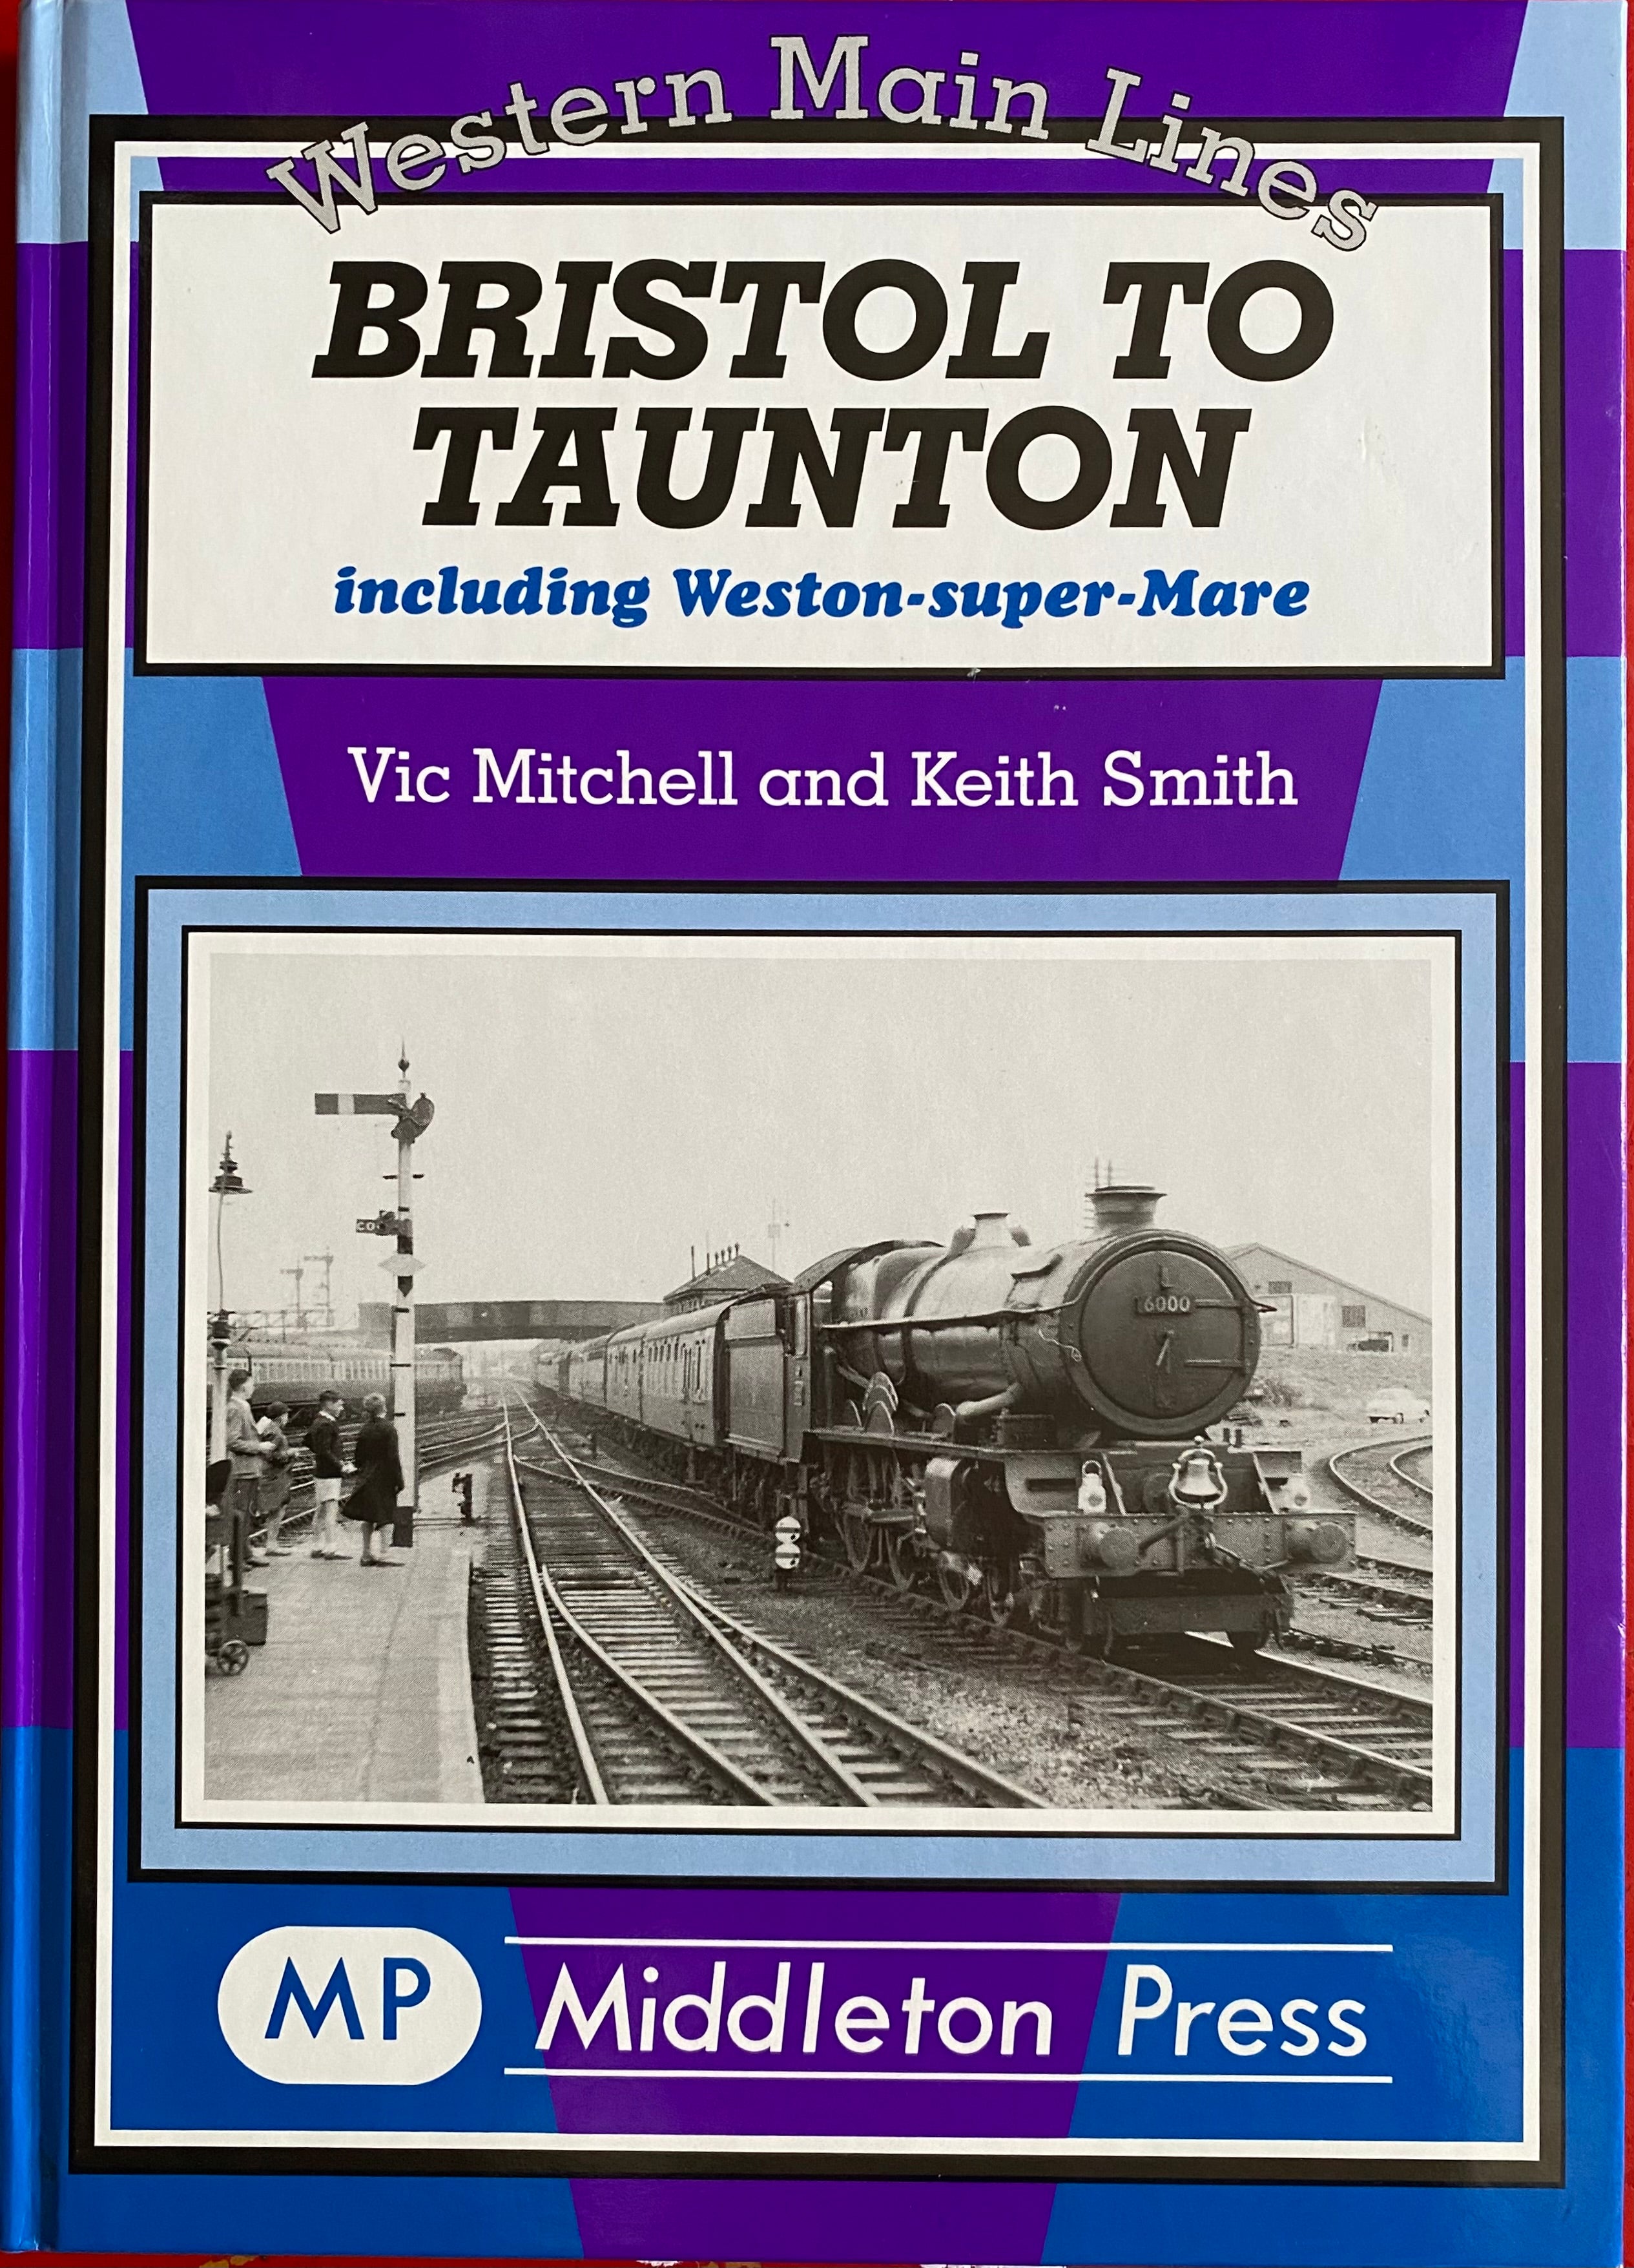 Western Main Lines Bristol to Taunton including Weston-super-Mare OUT OF PRINT TO BE REPRINTED